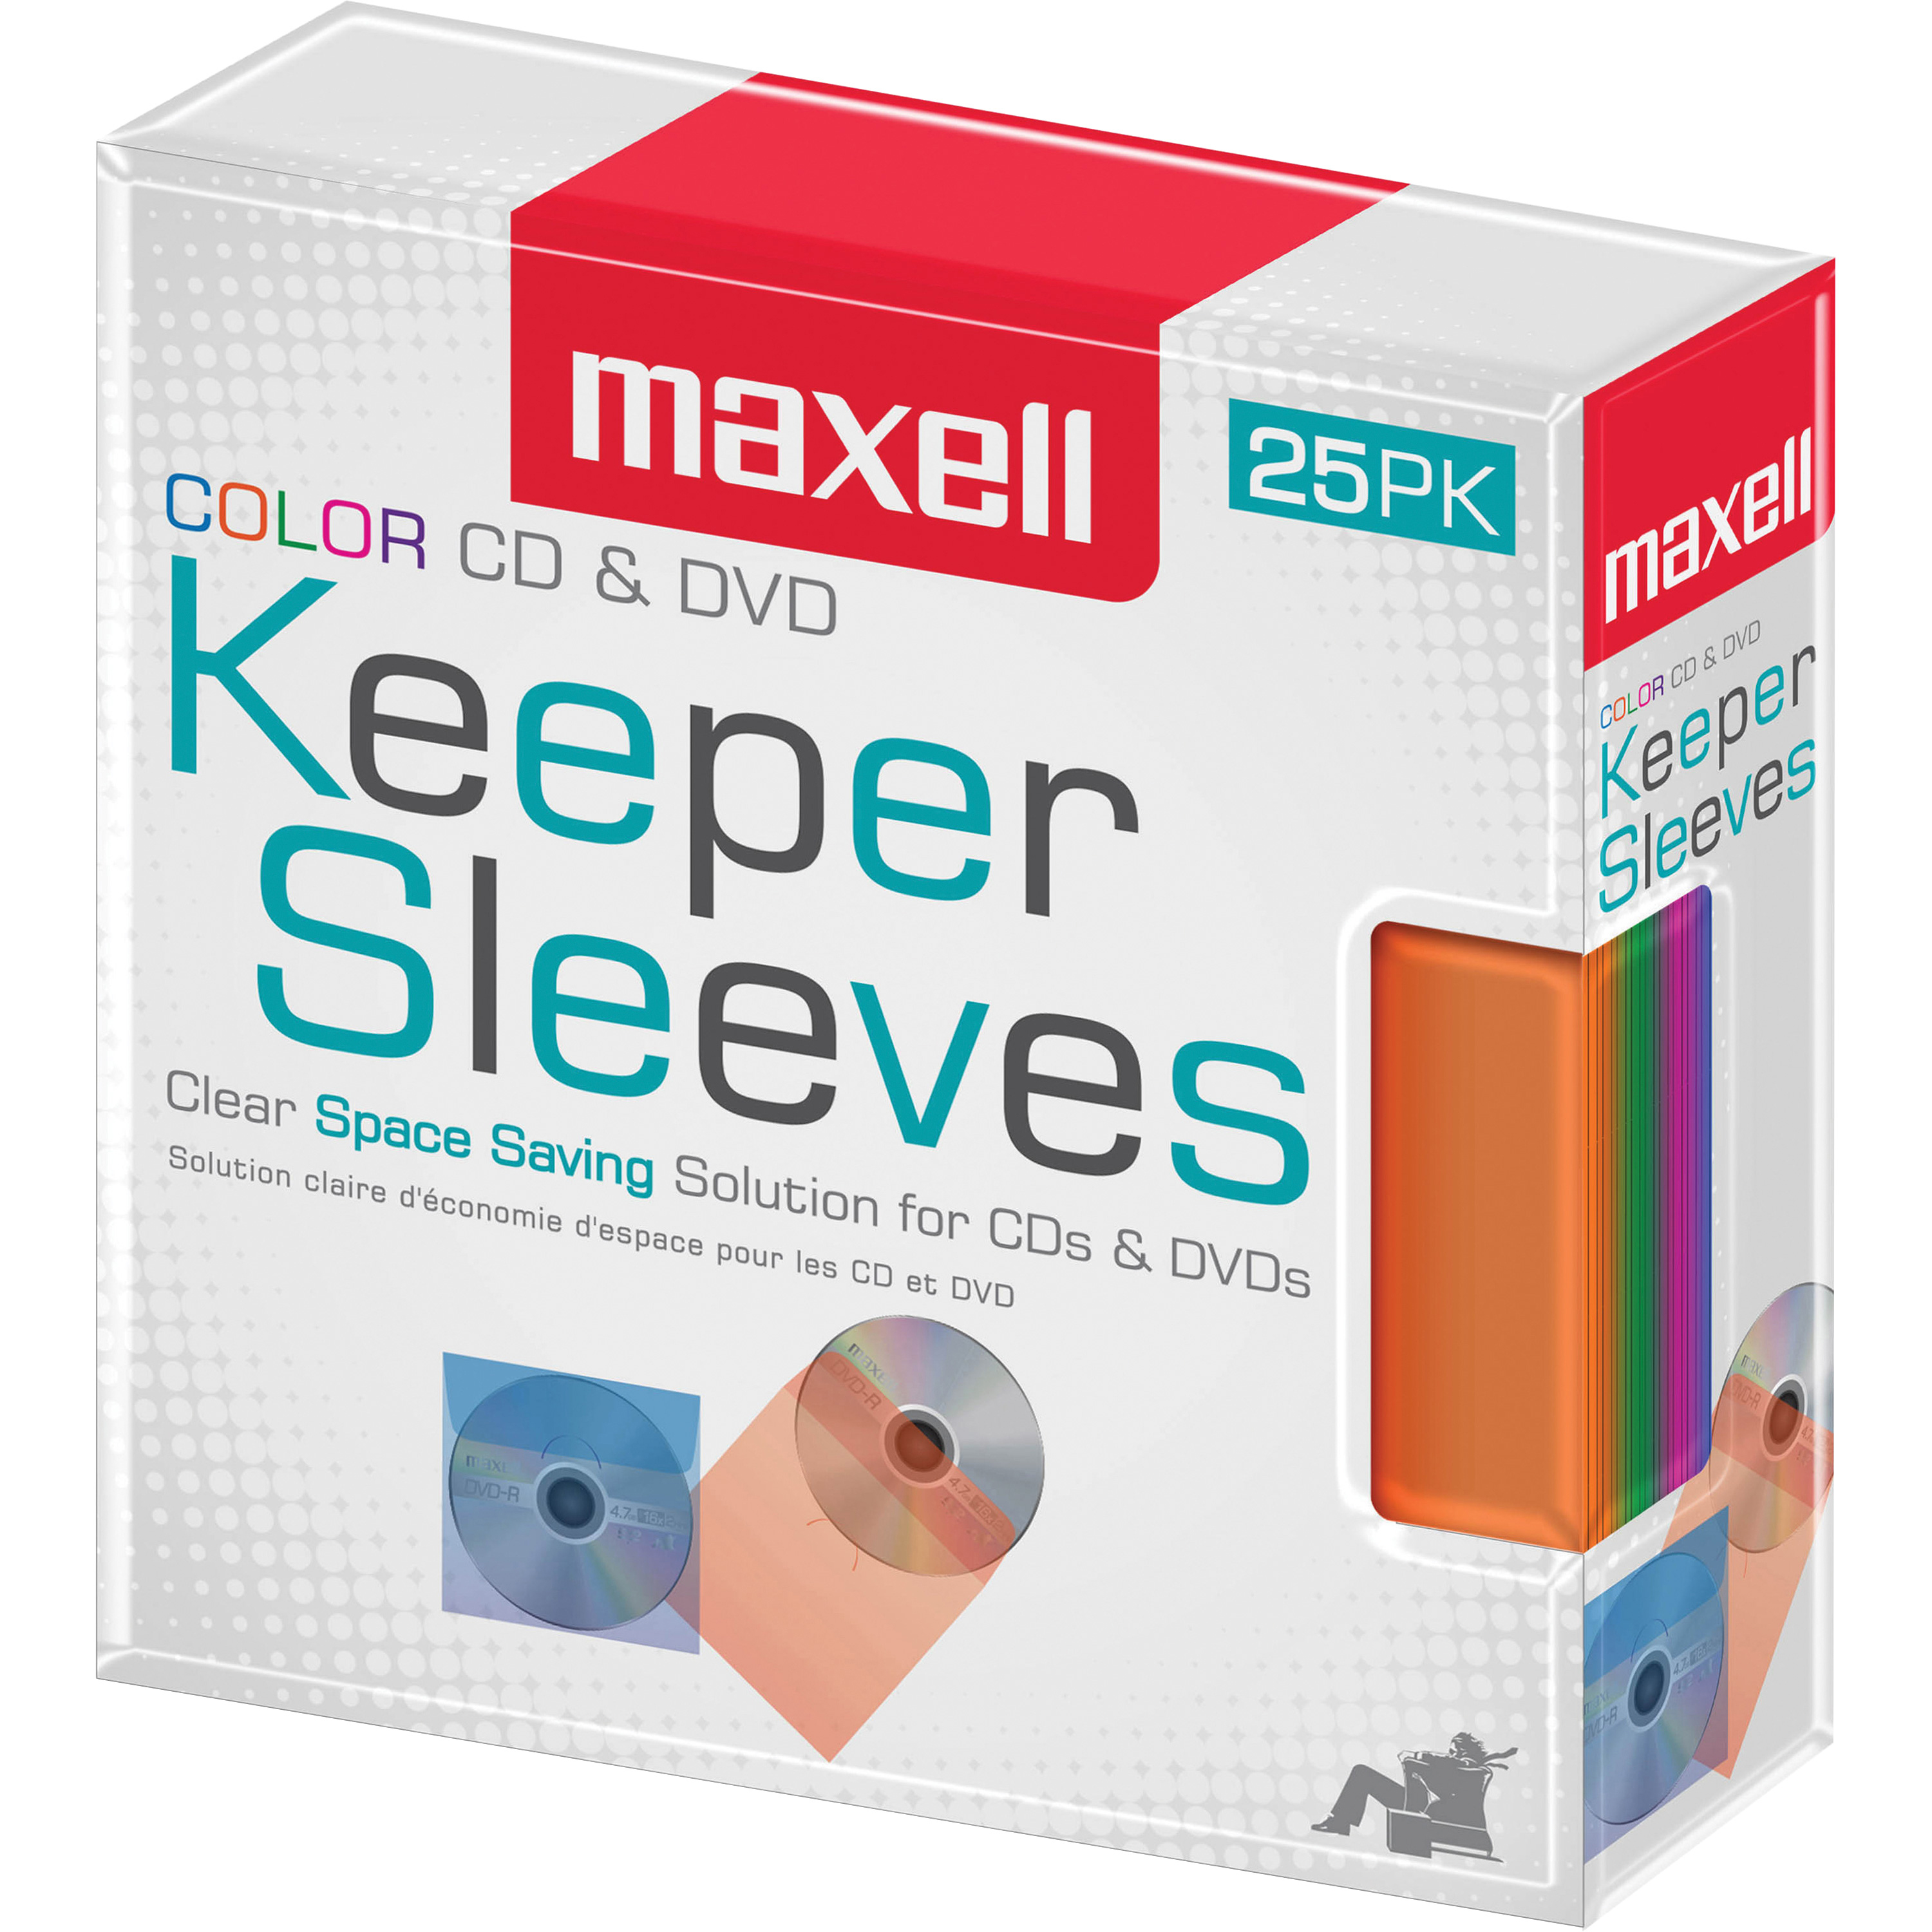 Image of ID 1355805021 1000 Maxell CD/DVD Assorted Colors Keeper Sleeves